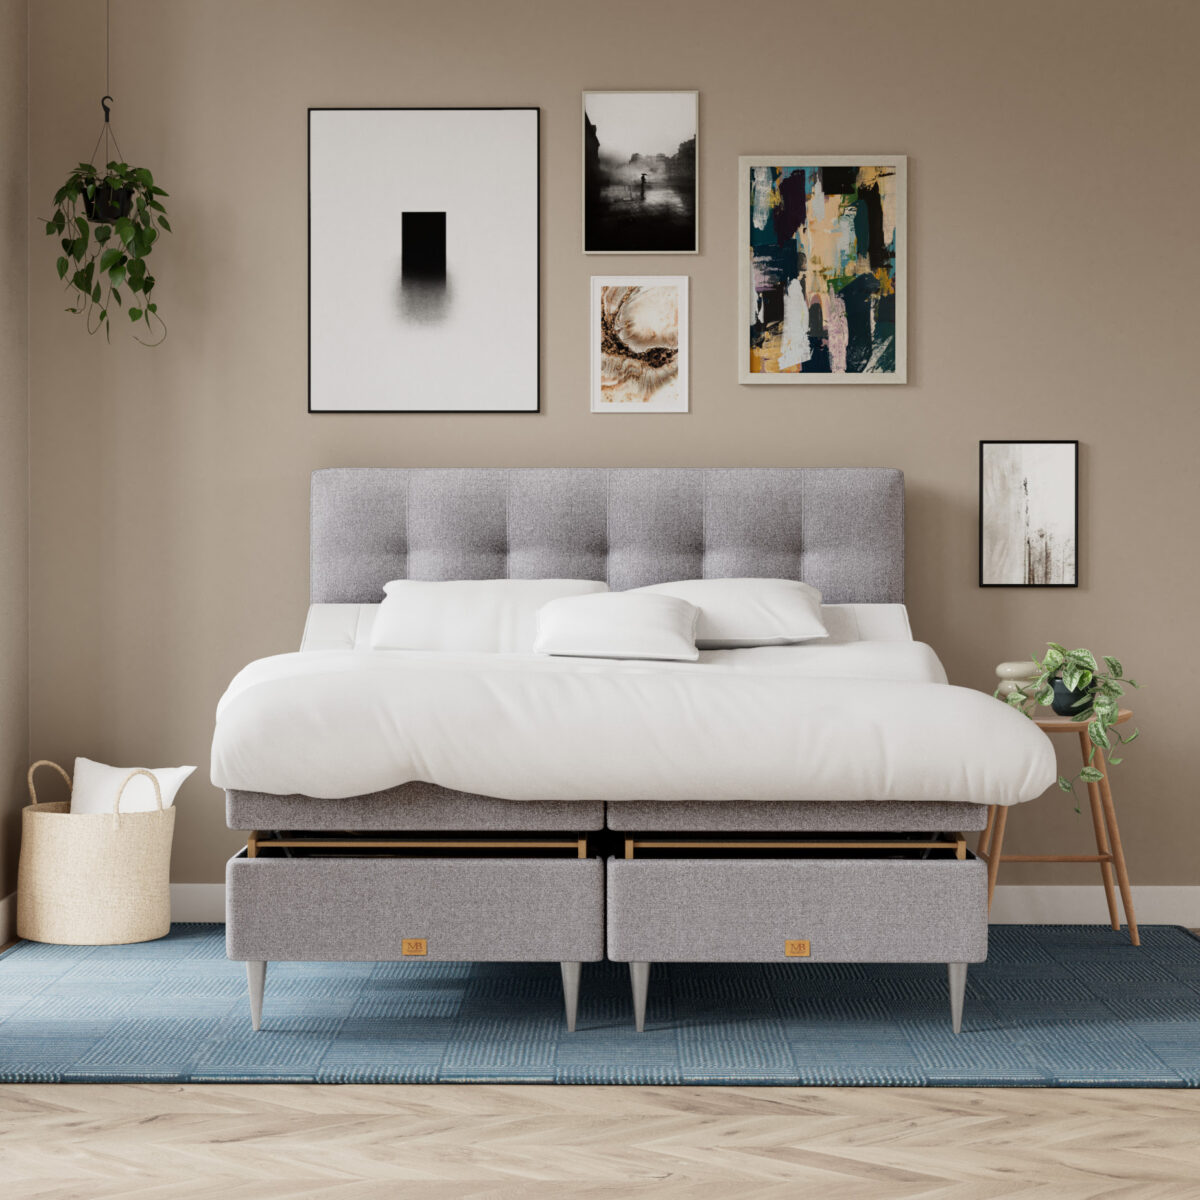 MasterBed Select Elora - Elevation - 180x200